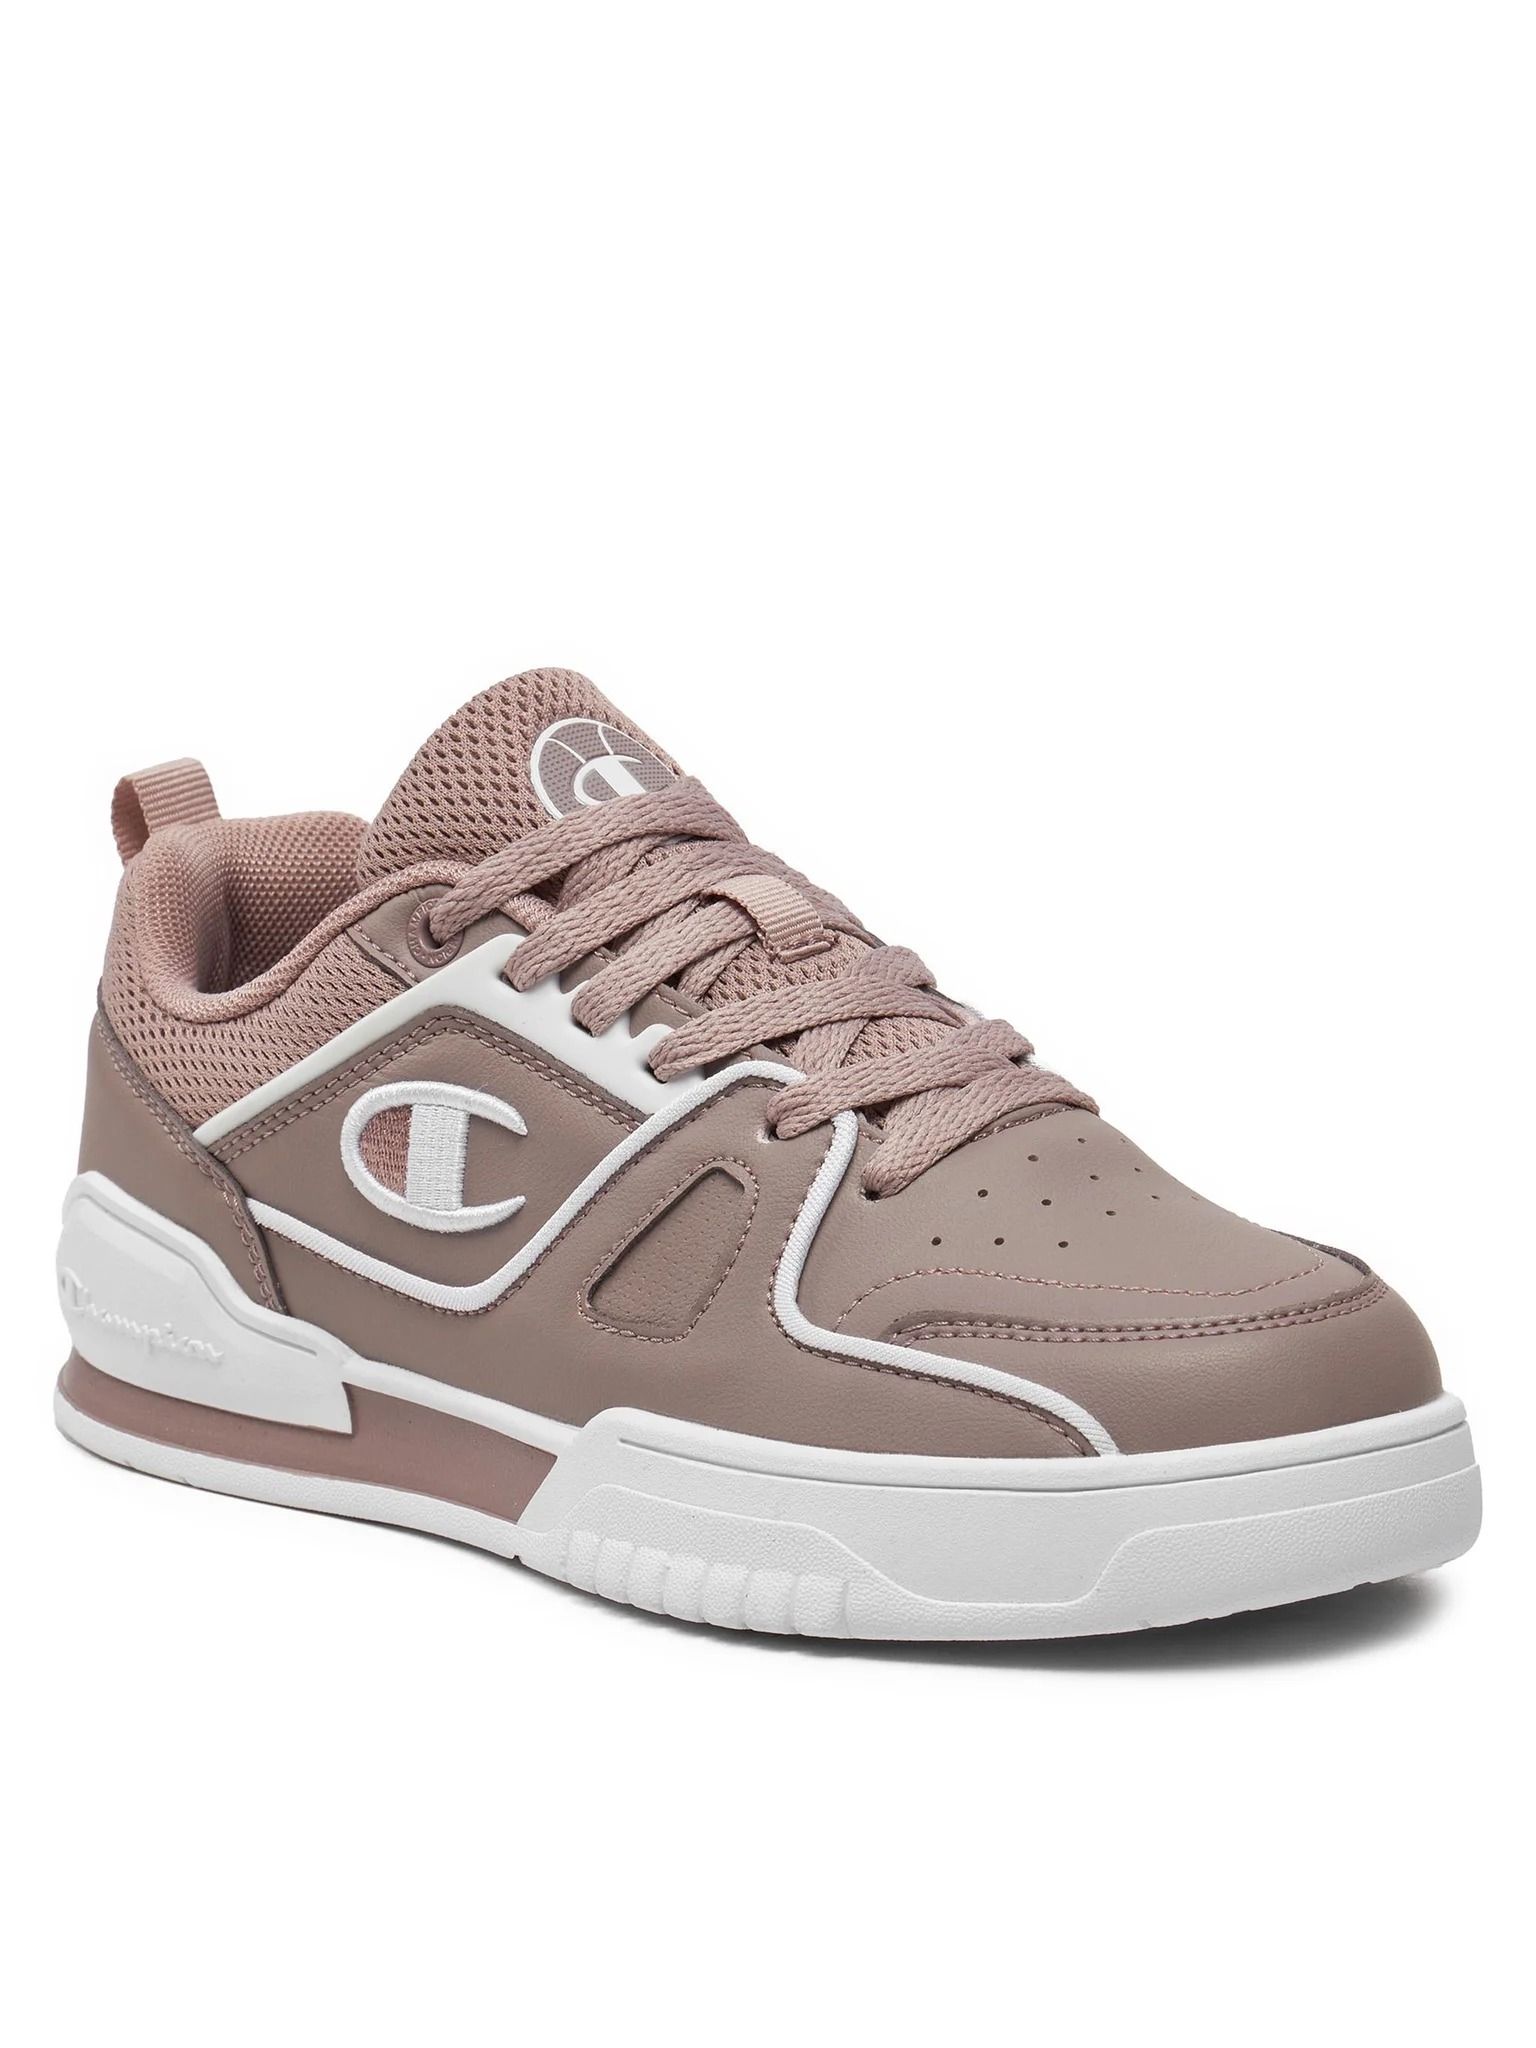 Champion Low Cut Sneakers